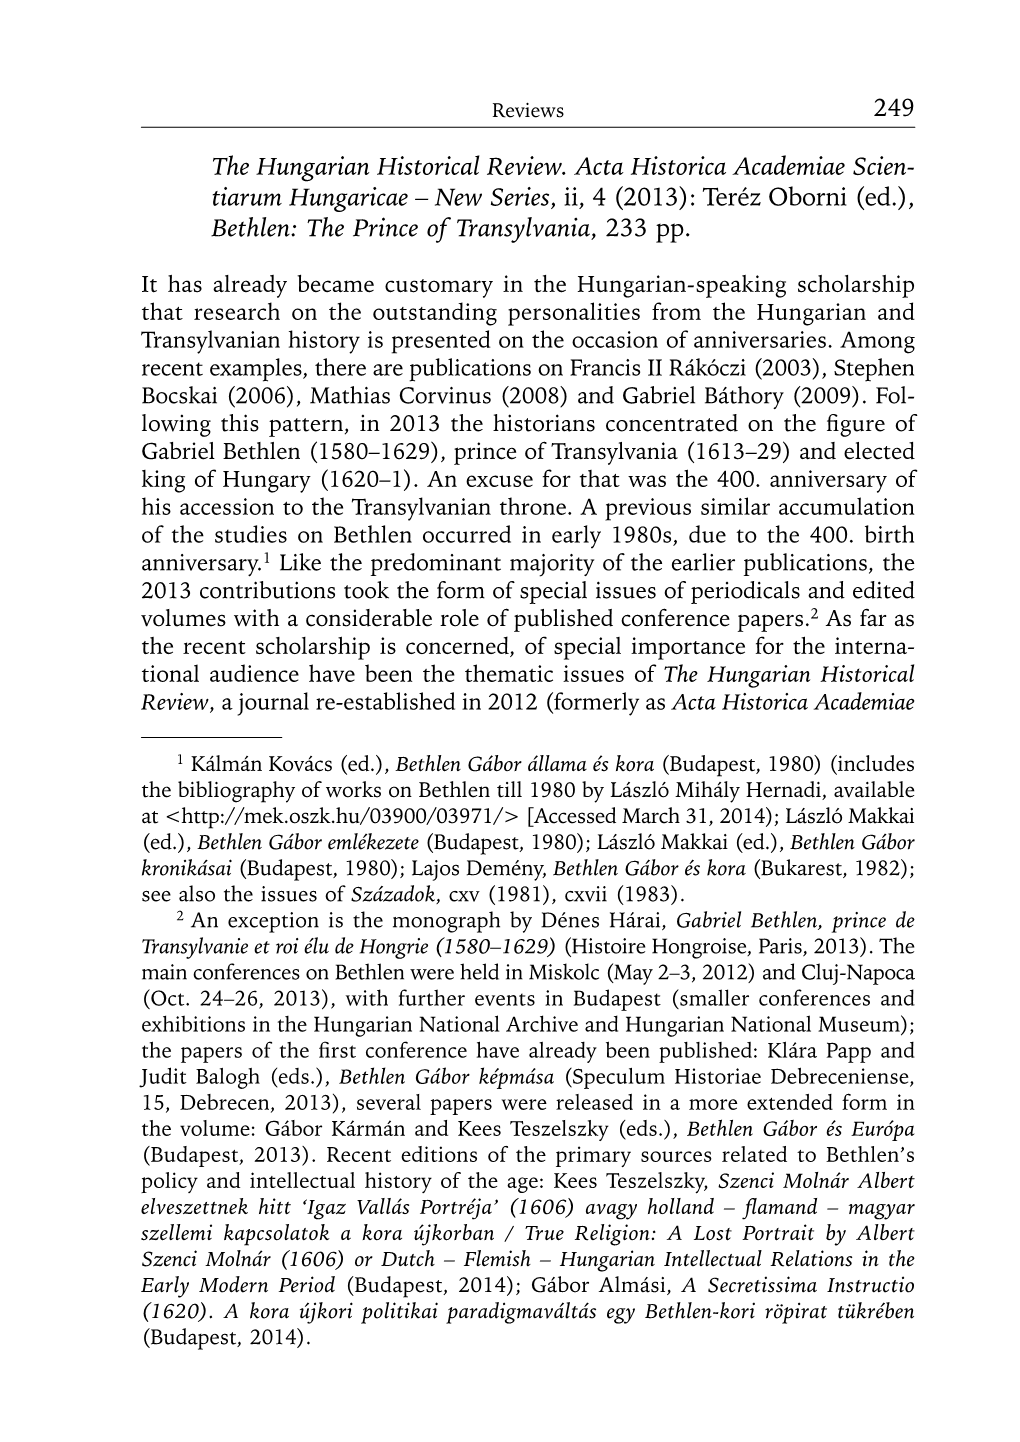 The Hungarian Historical Review, 2/4 (2013), Bethlen: the Prince of Transylvania, Ed. T. Oborni